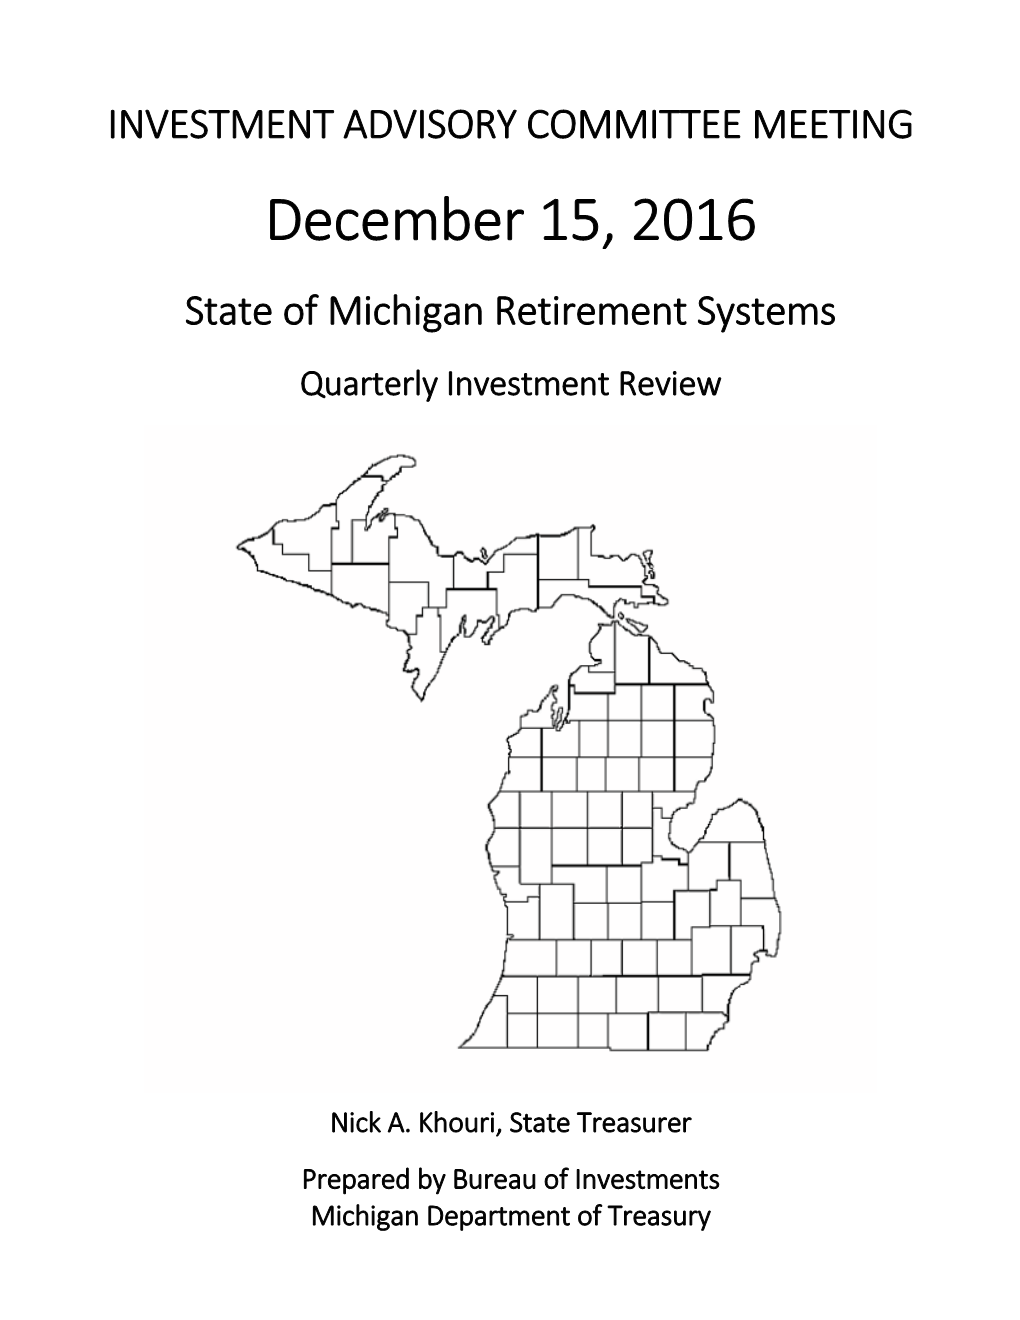 INVESTMENT ADVISORY COMMITTEE MEETING December 15, 2016 State of Michigan Retirement Systems Quarterly Investment Review